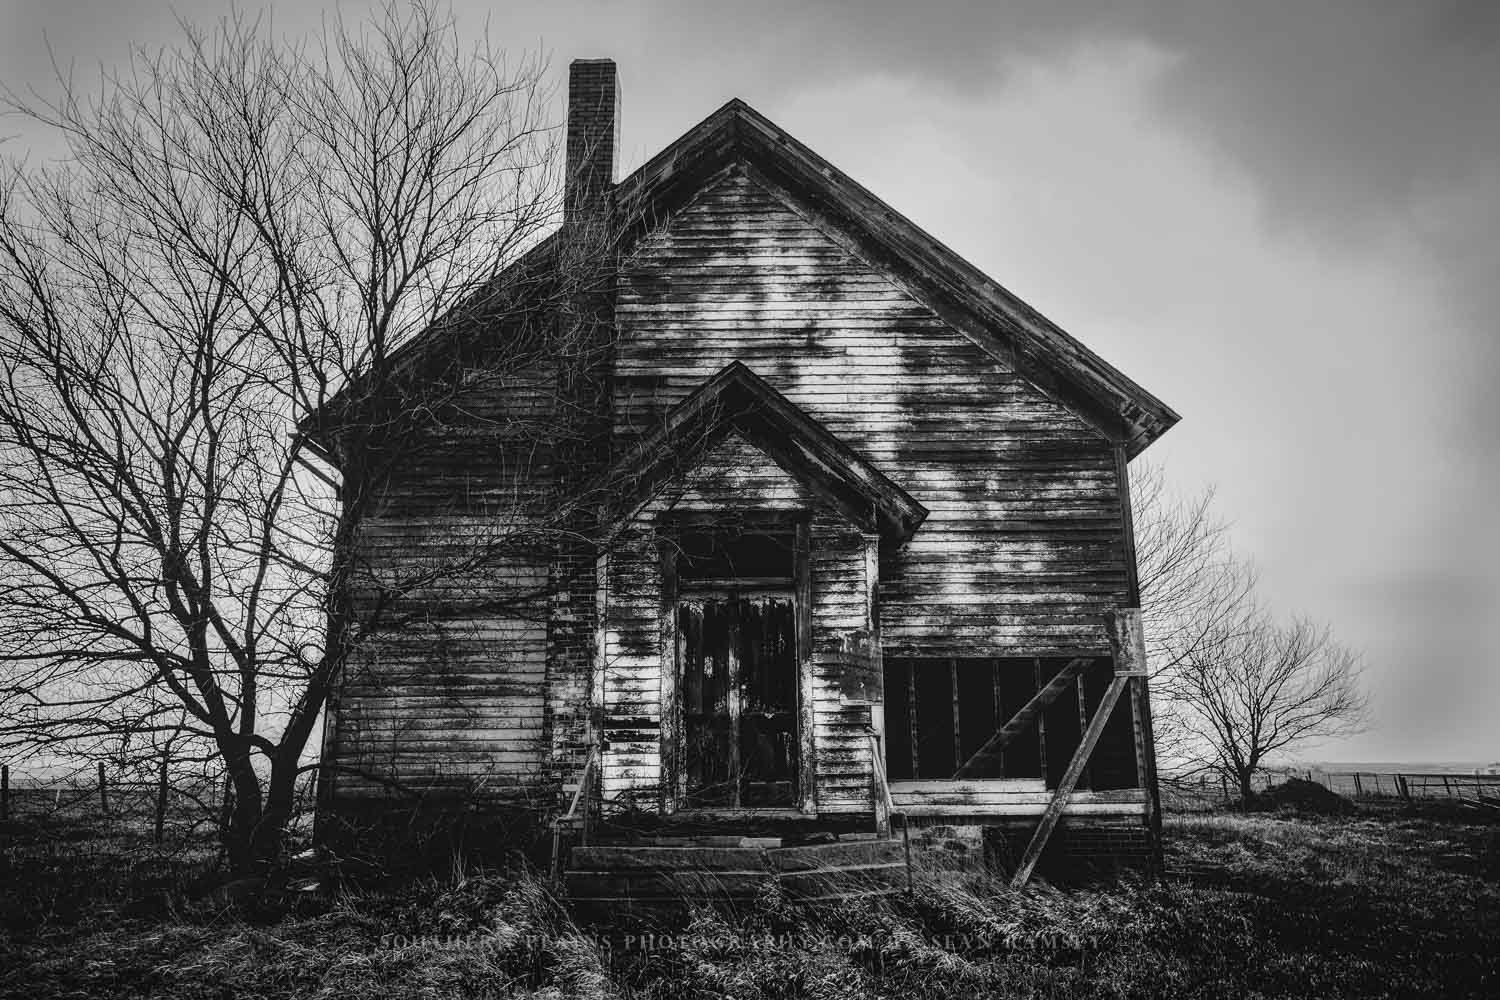 Black and white country photography print of an abandoned schoolhouse on a stormy spring day on the plains of Iowa by Sean Ramsey of Southern Plains Photography.